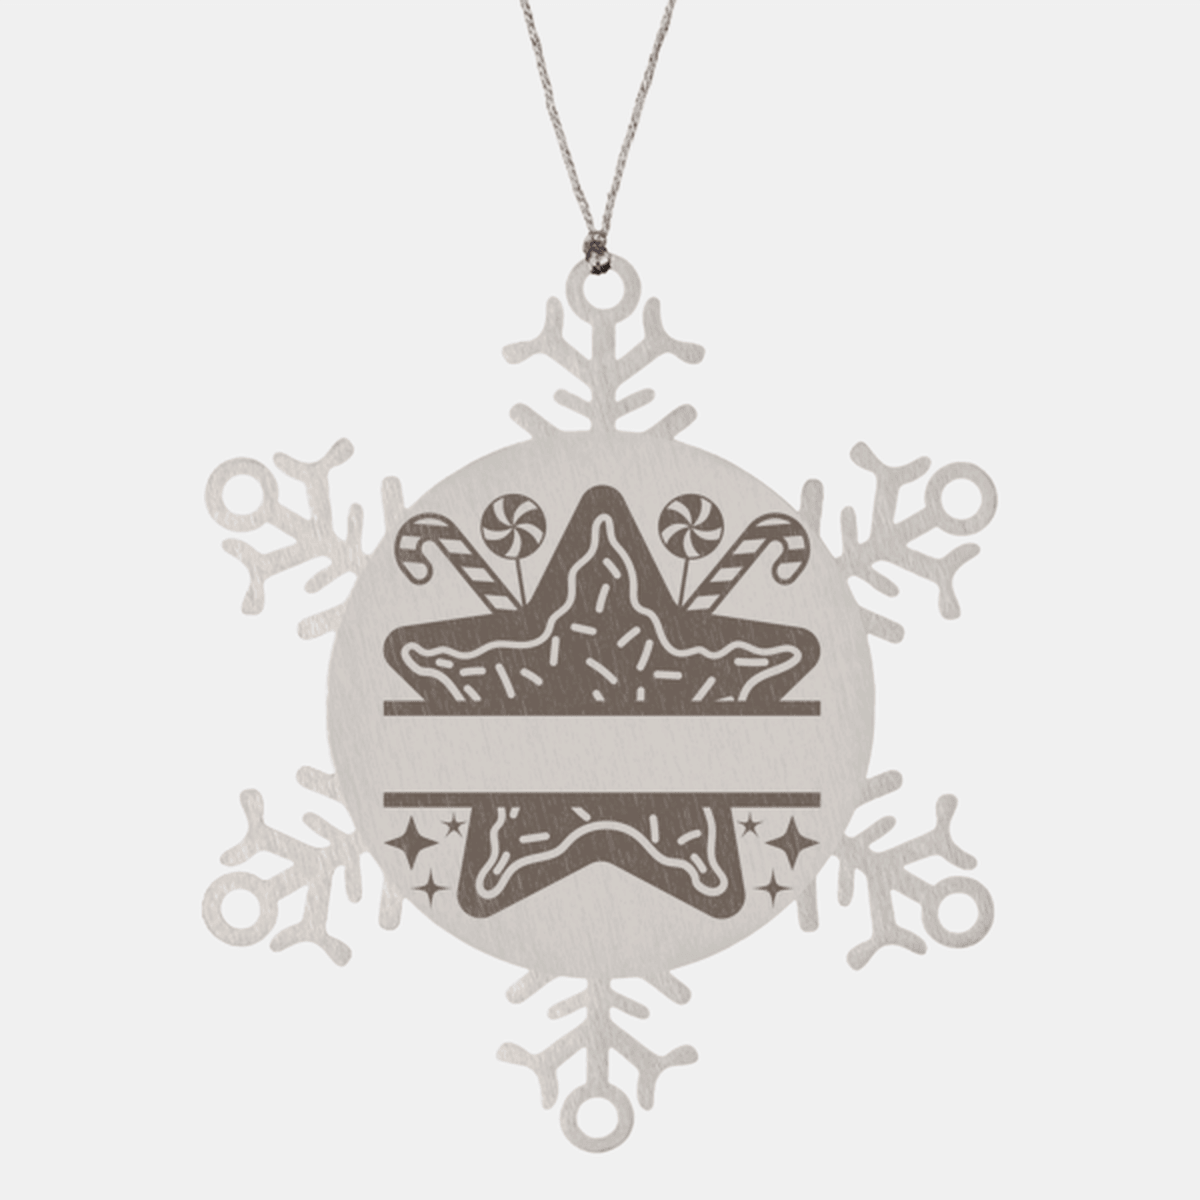 Personalized Snowflake Christmas Star Cookie Tree Ornament Family Name Laser Engraved Stainless Steel - Mallard Moon Gift Shop